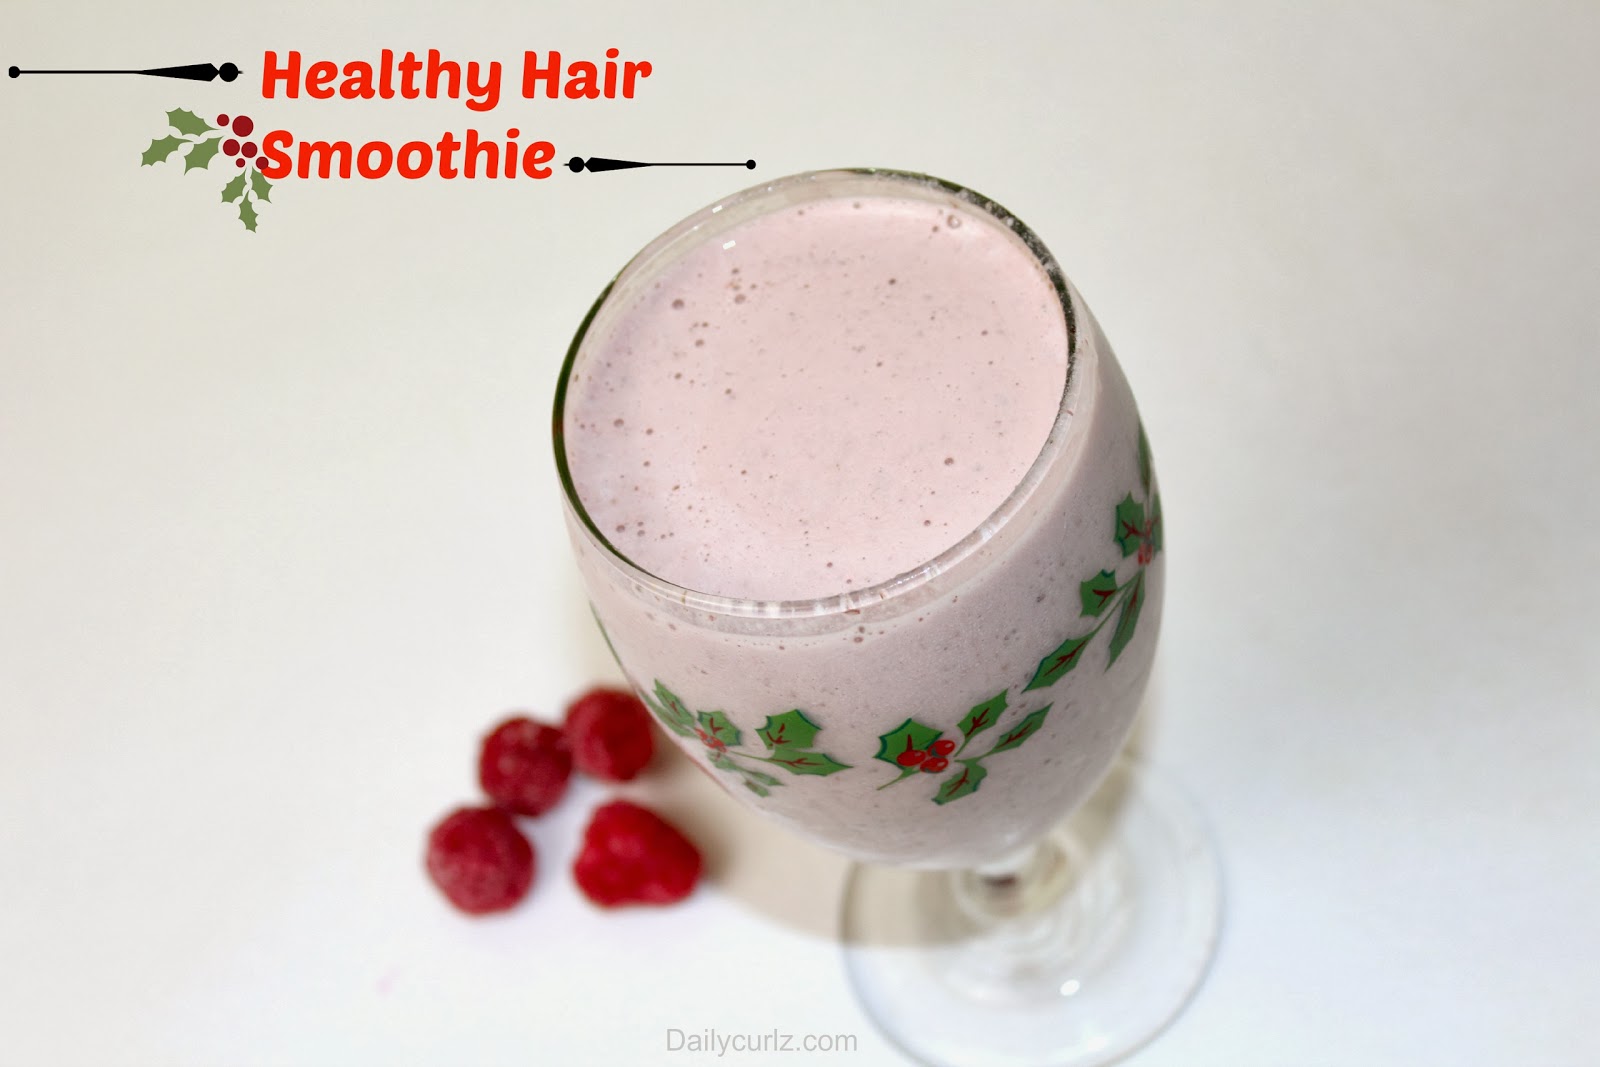 Don’t skip Breakfast this Holiday; try this Healthy Hair Smoothie/ Batido para un cabello saludable.